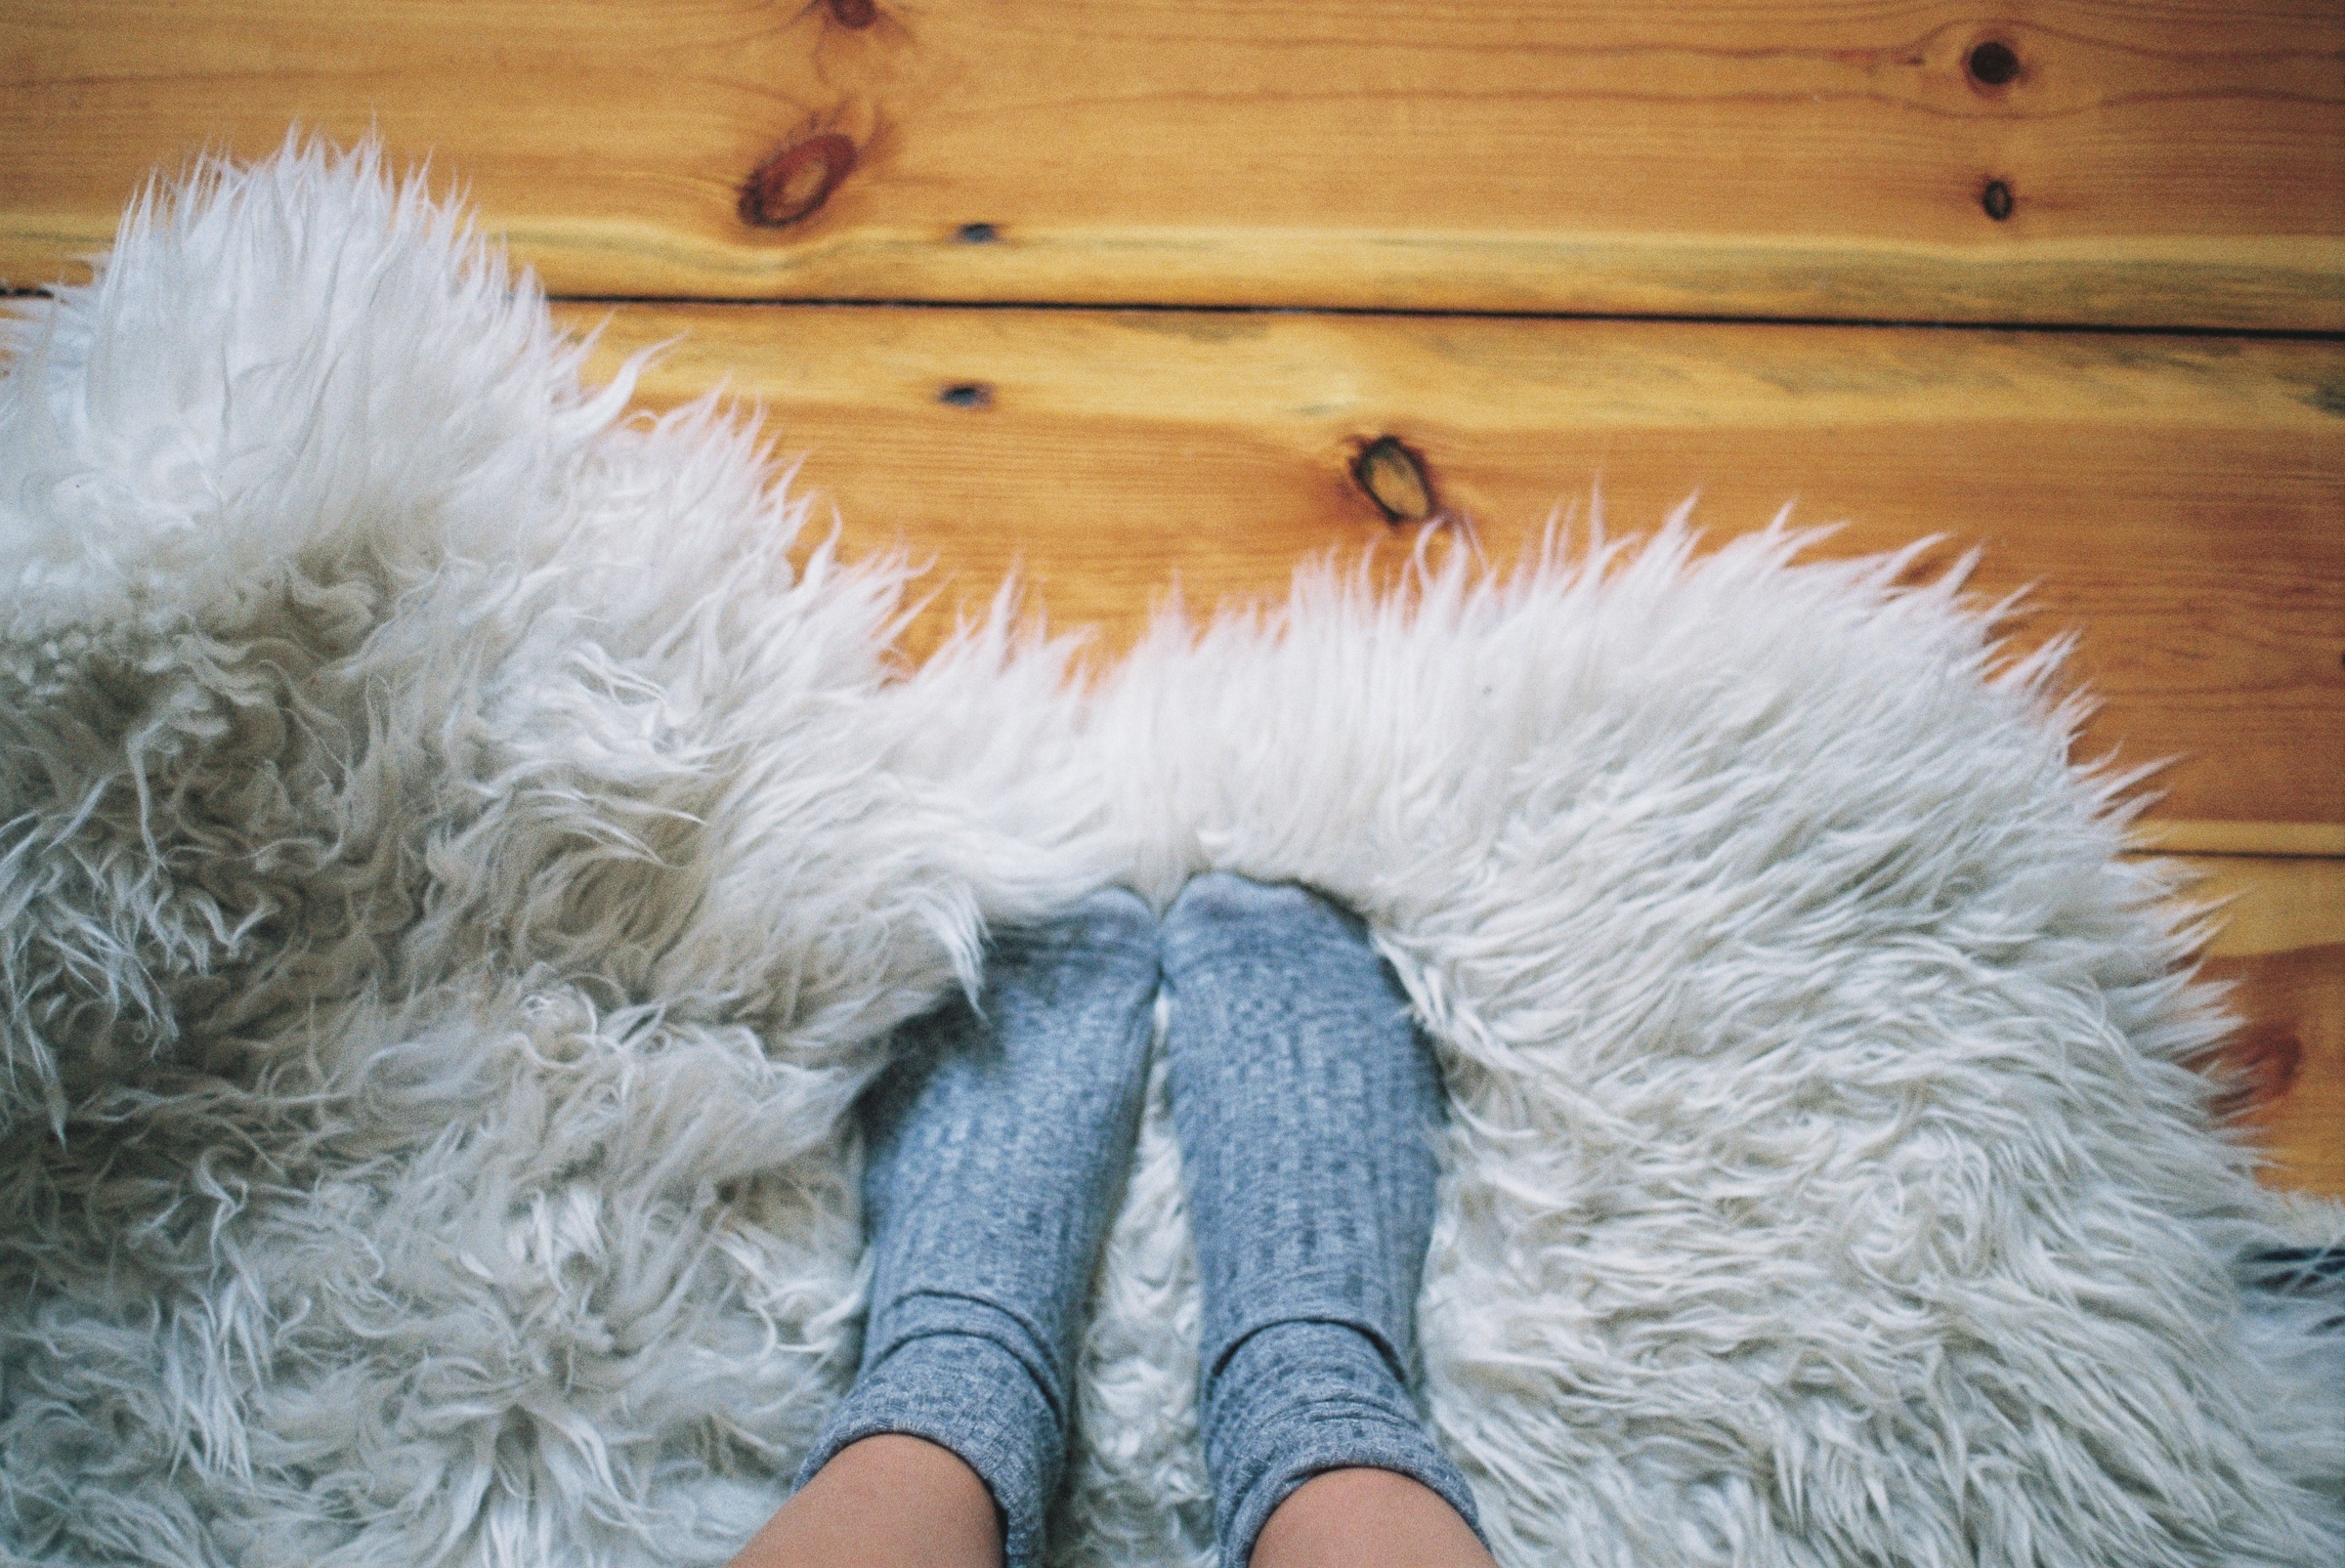 Investing in cosy rugs can keep your feet toasty if you have floorboards in your home